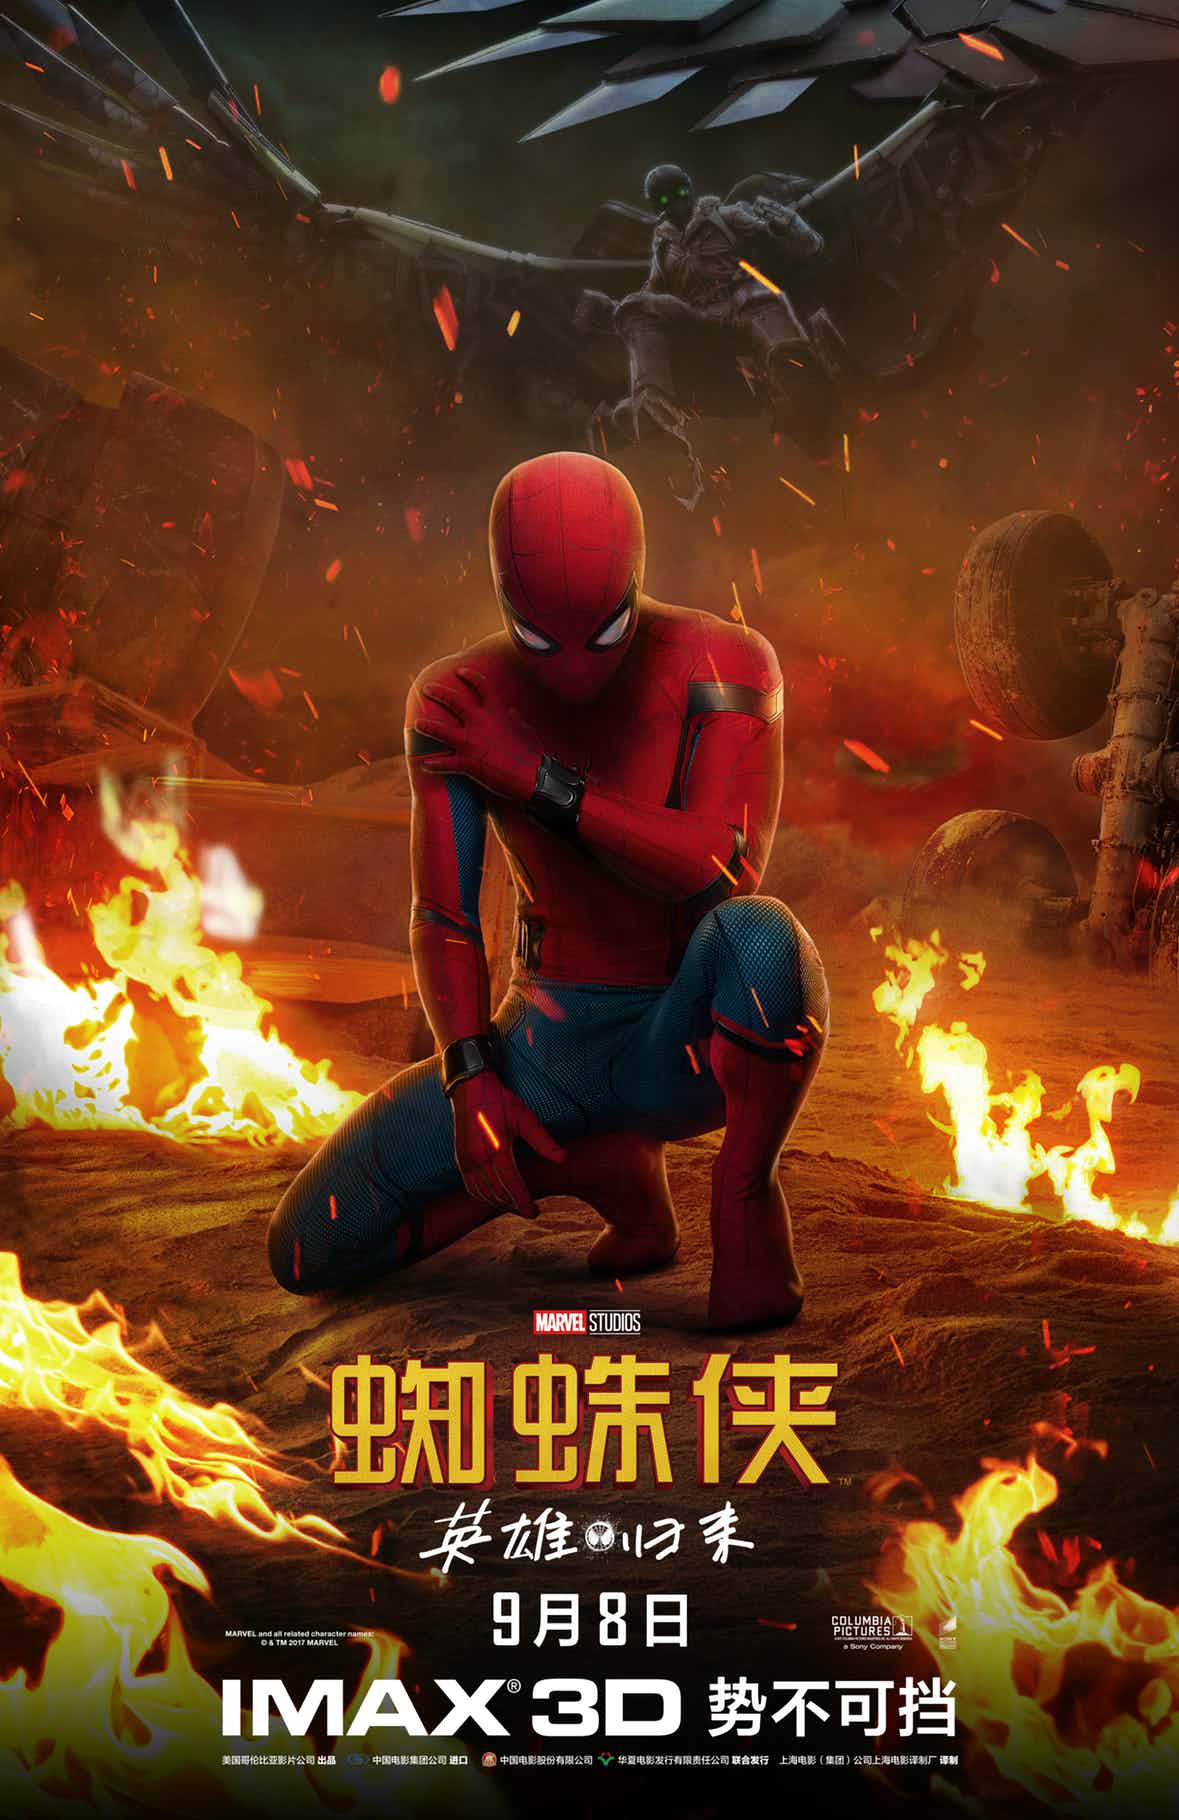 spider-man-homecoming-chinese-poster.jpg